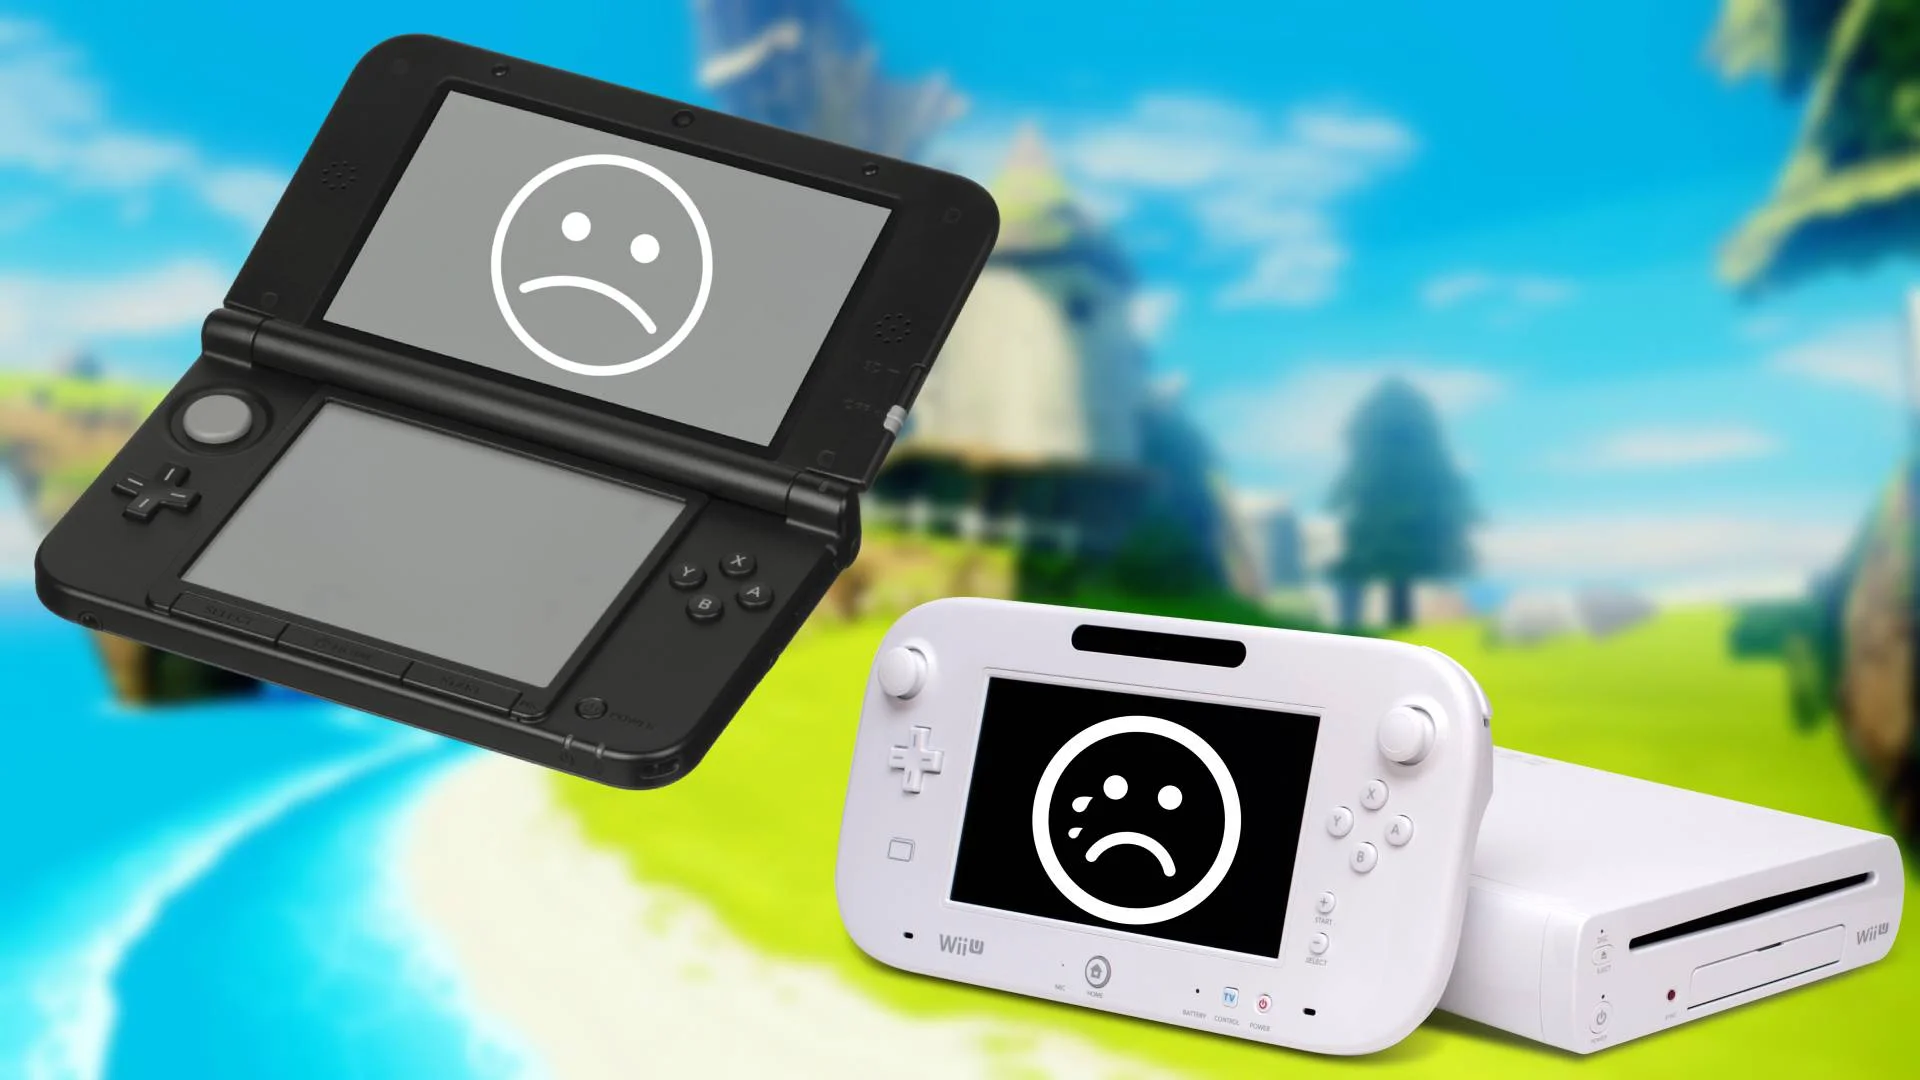 Every 3DS and Wii U eShop Game We're About to Lose Forever - KeenGamer